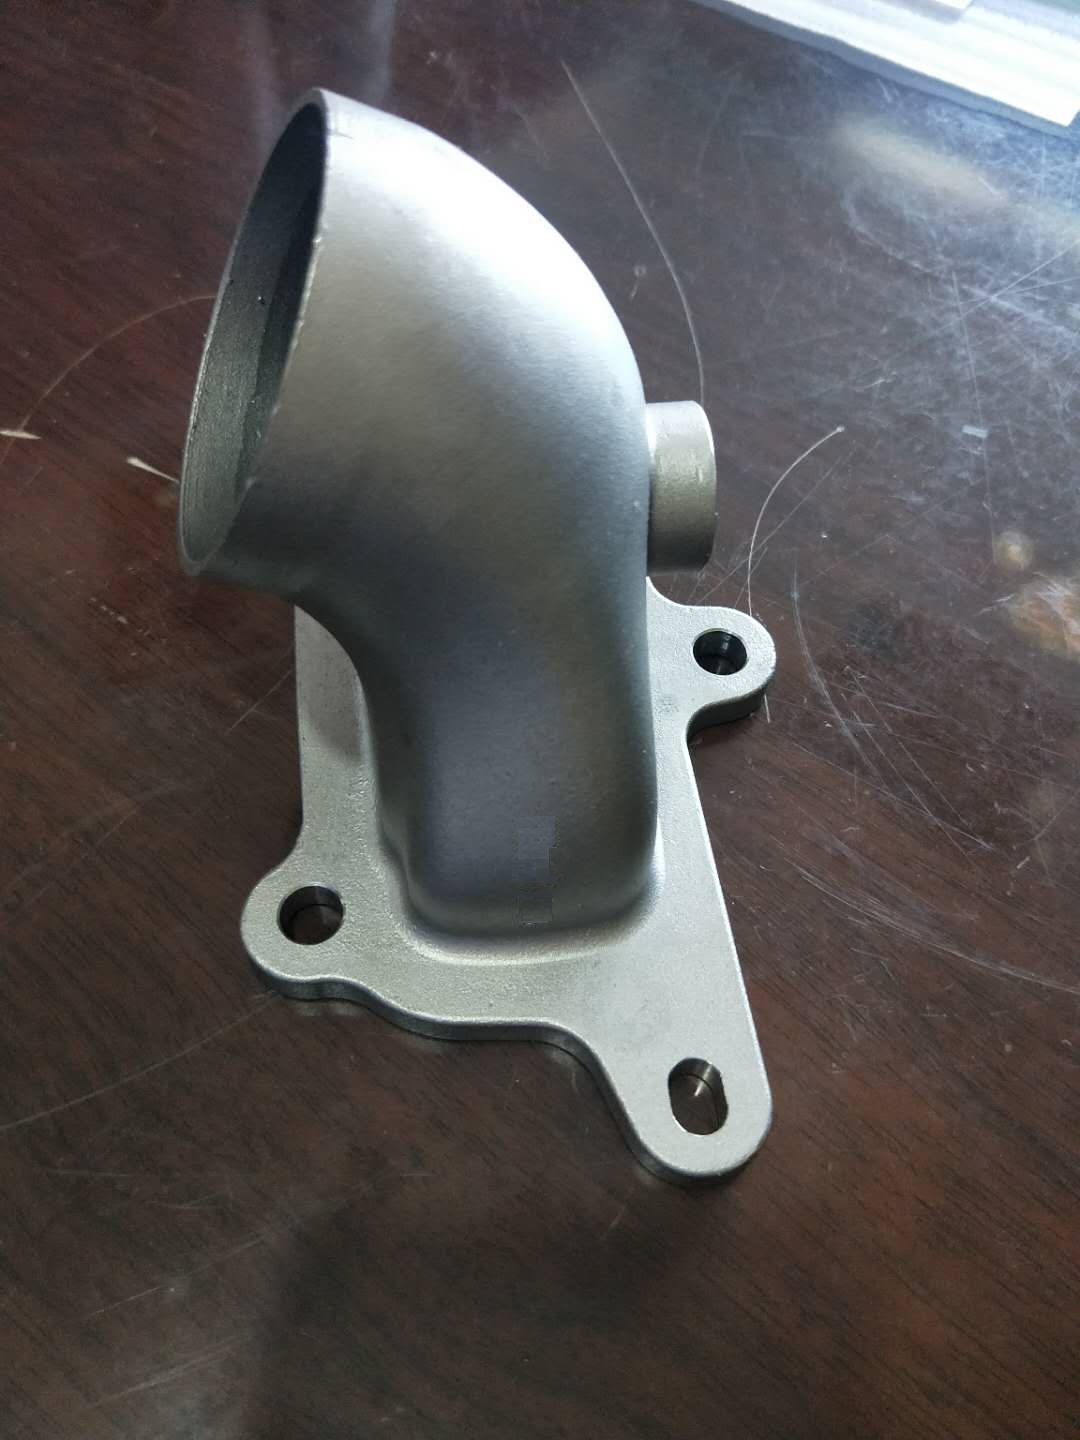 Stainless steel connecting coupling for engine